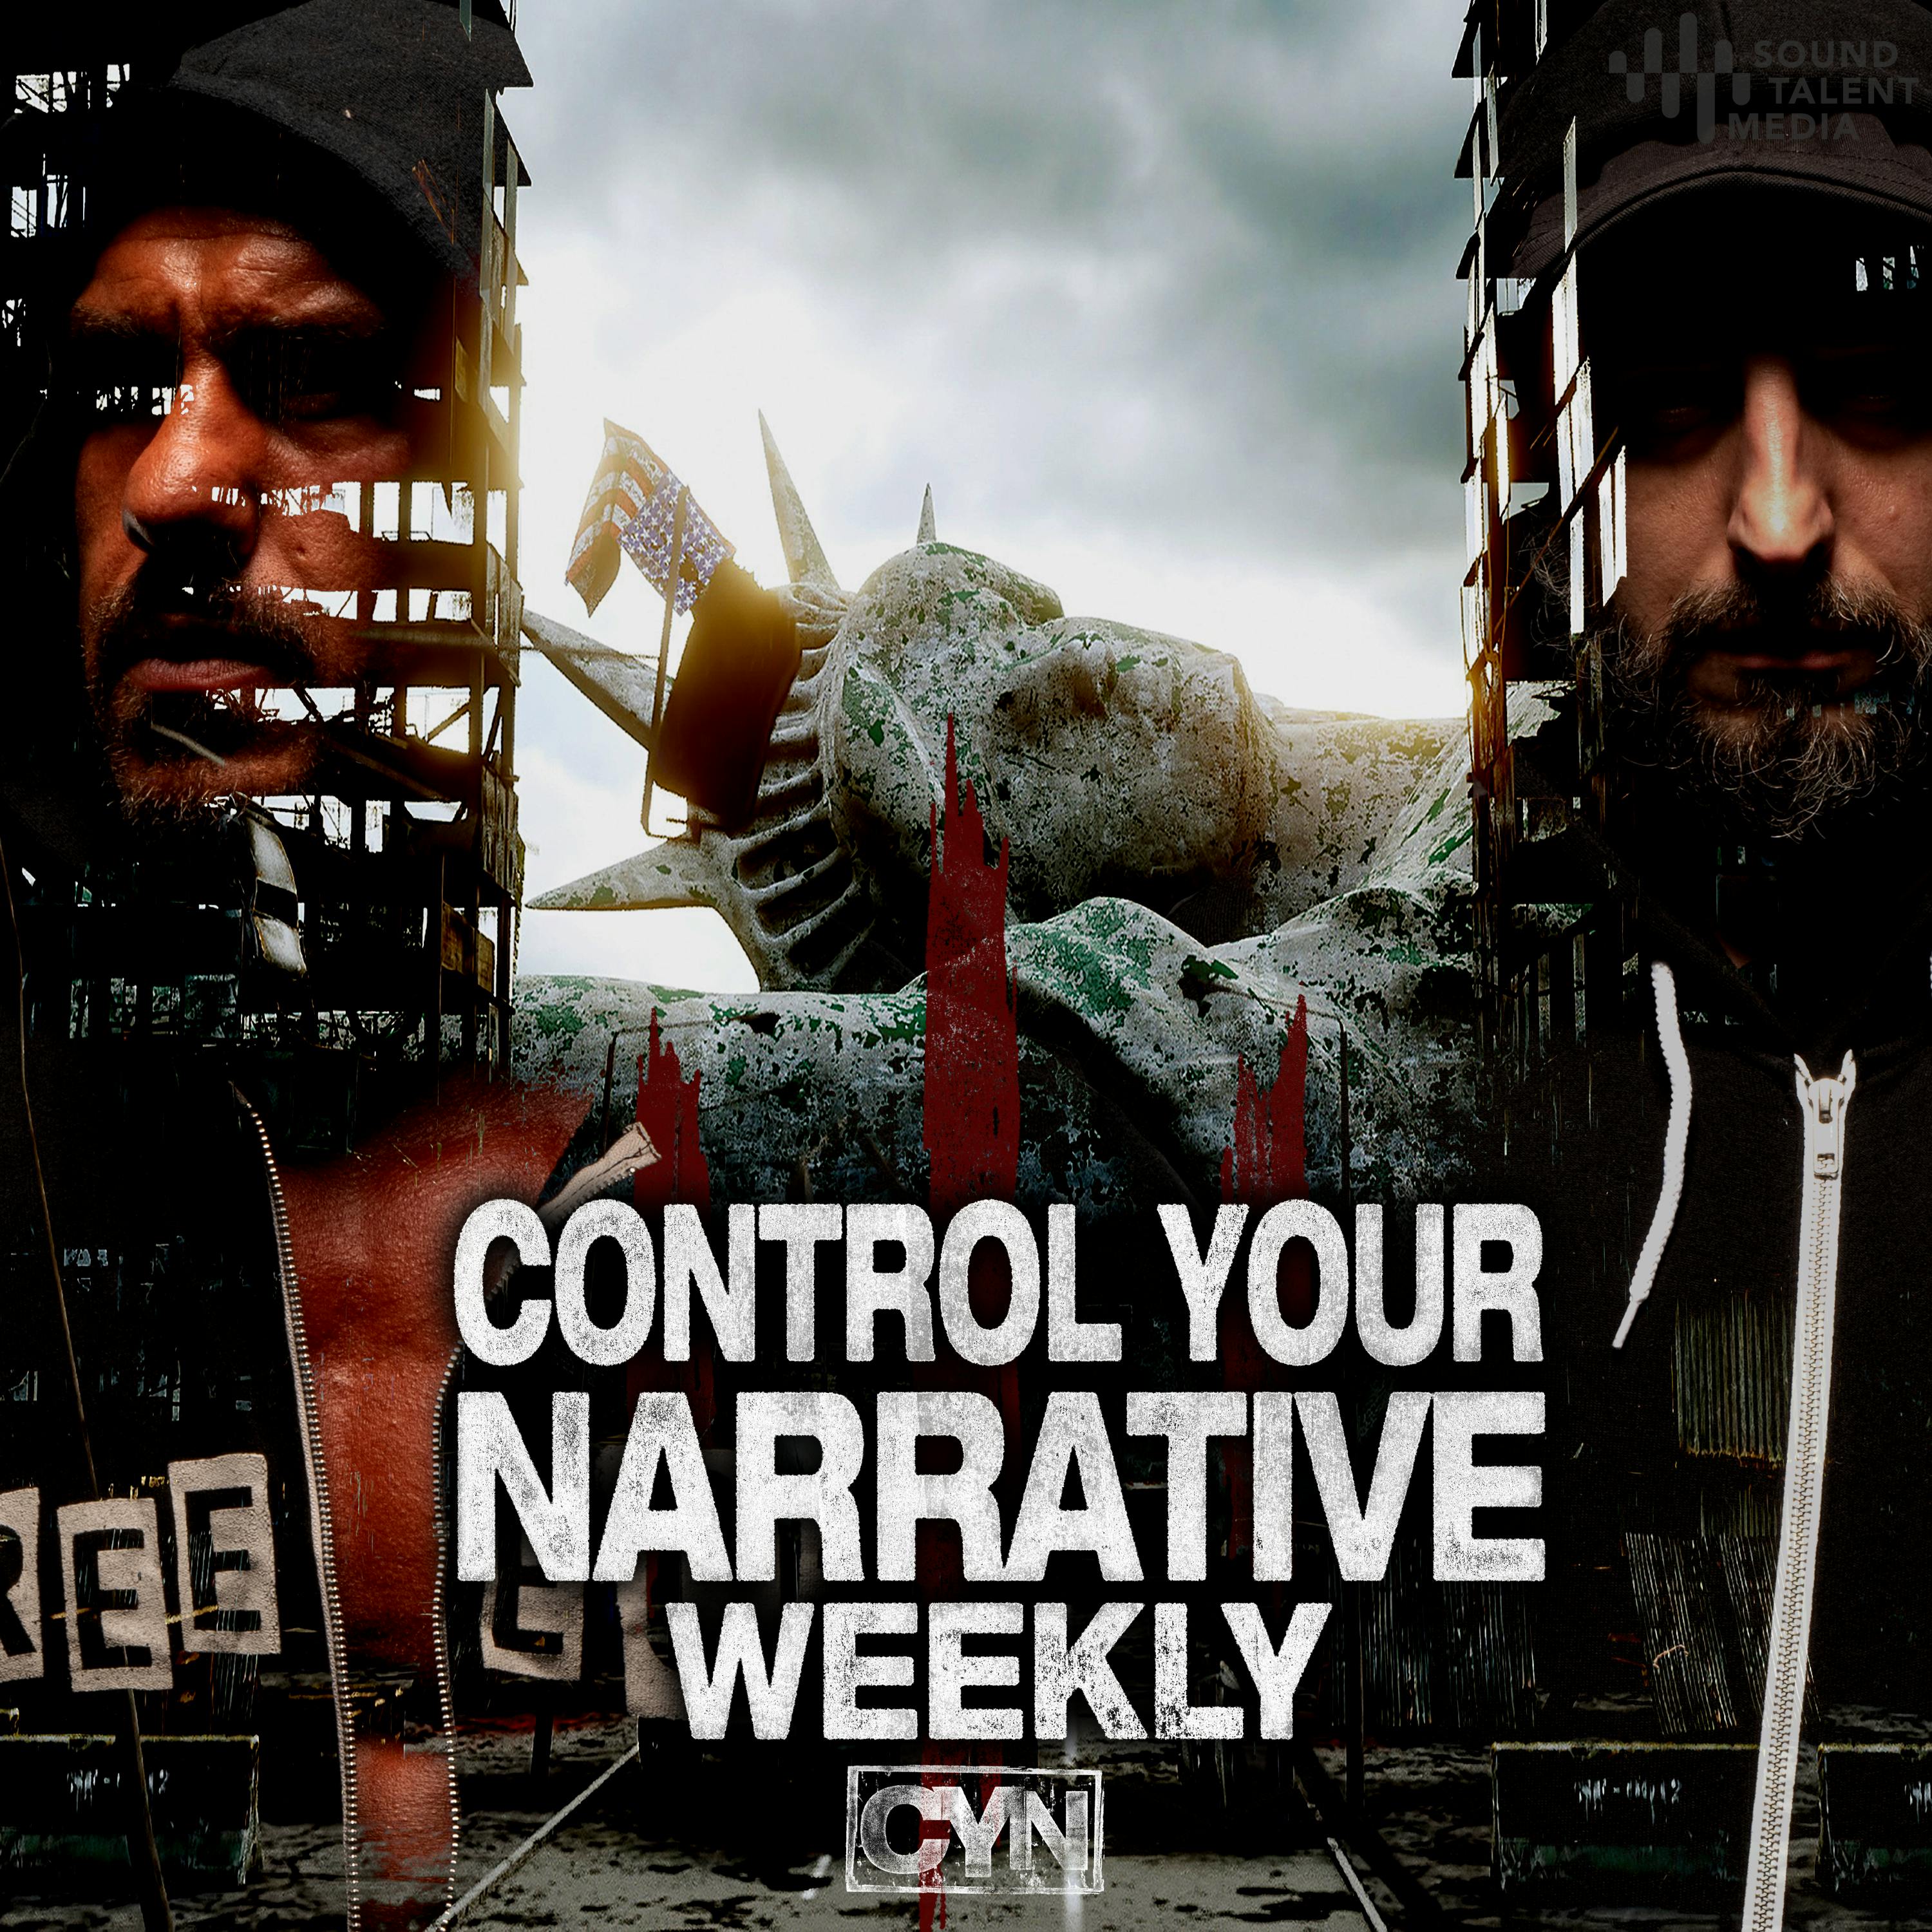 Welcome to Control Your Narrative Weekly